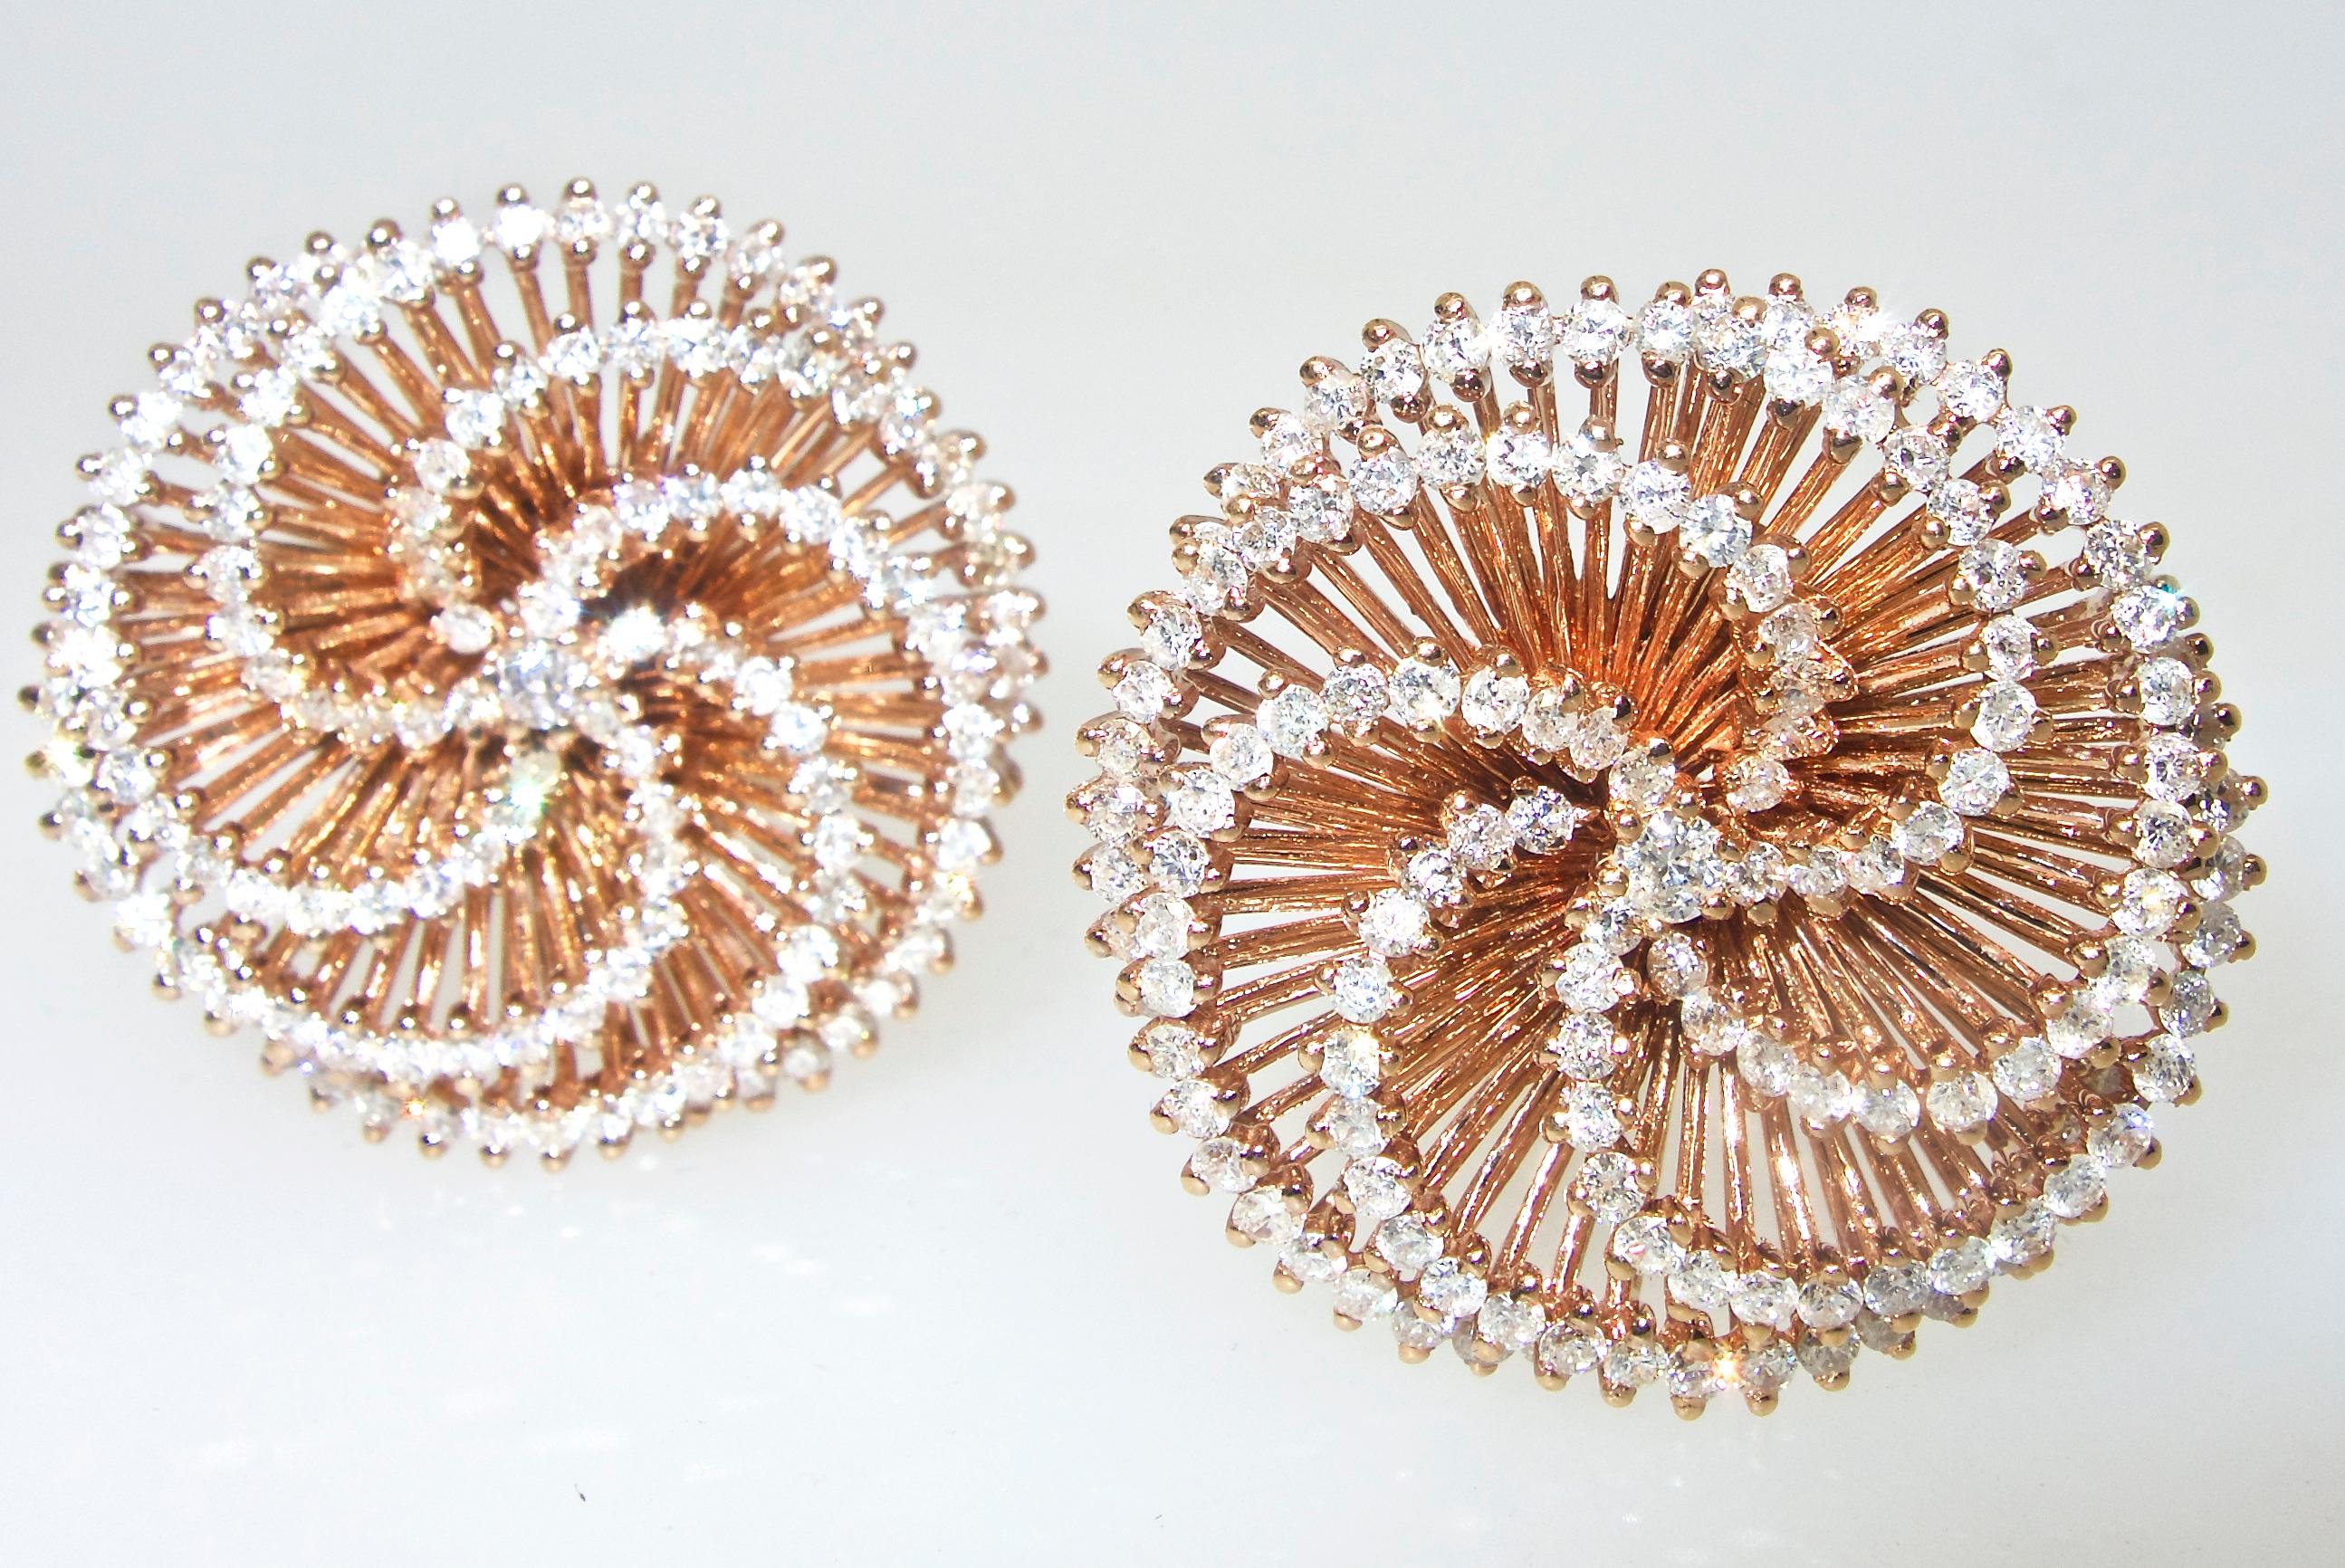 Retro style 18K  pink gold earrings set with 266 fine white diamonds - all well matched, well cut and weighing 6.75 cts.  These diamonds are all approximately H and VS1 in clarity.  Unusual with fine design and wonderful hand workmanship, these